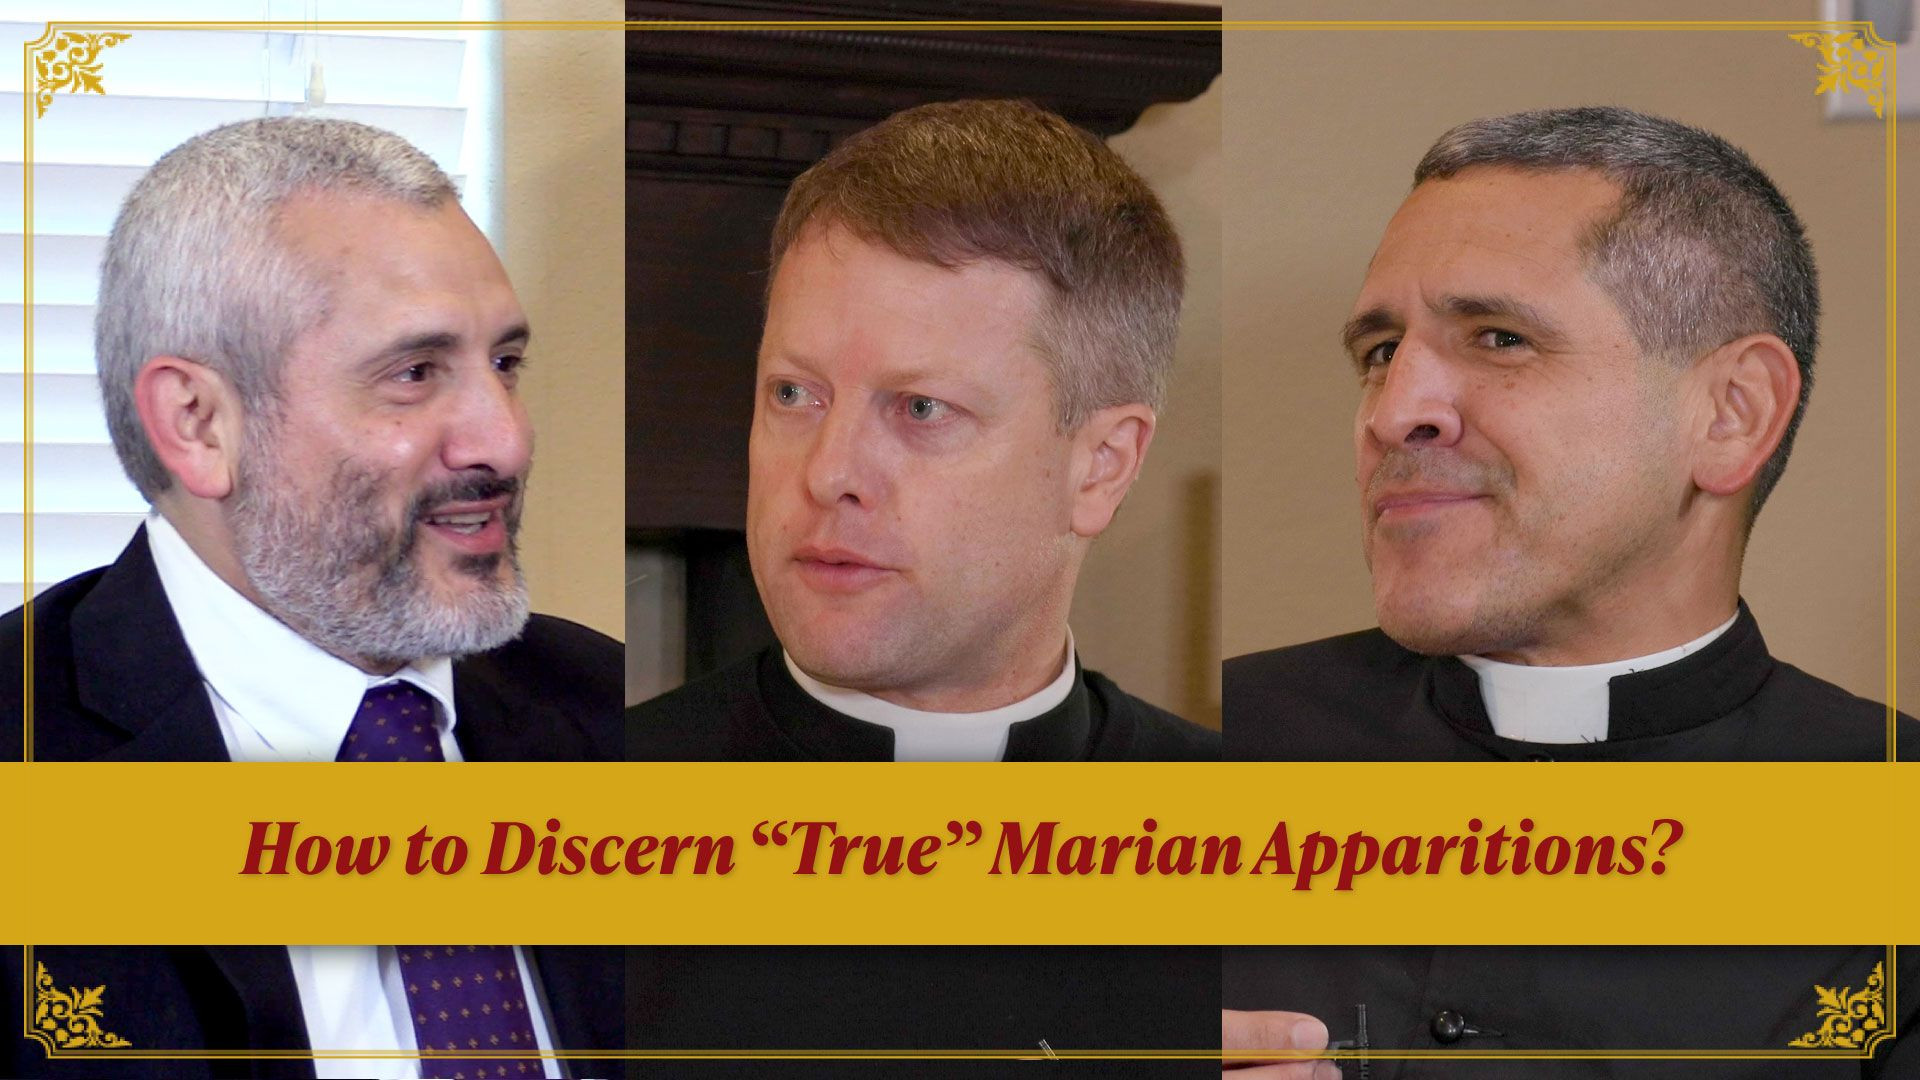 Fireside Chat with Father: What About the Other Marian Apparitions?